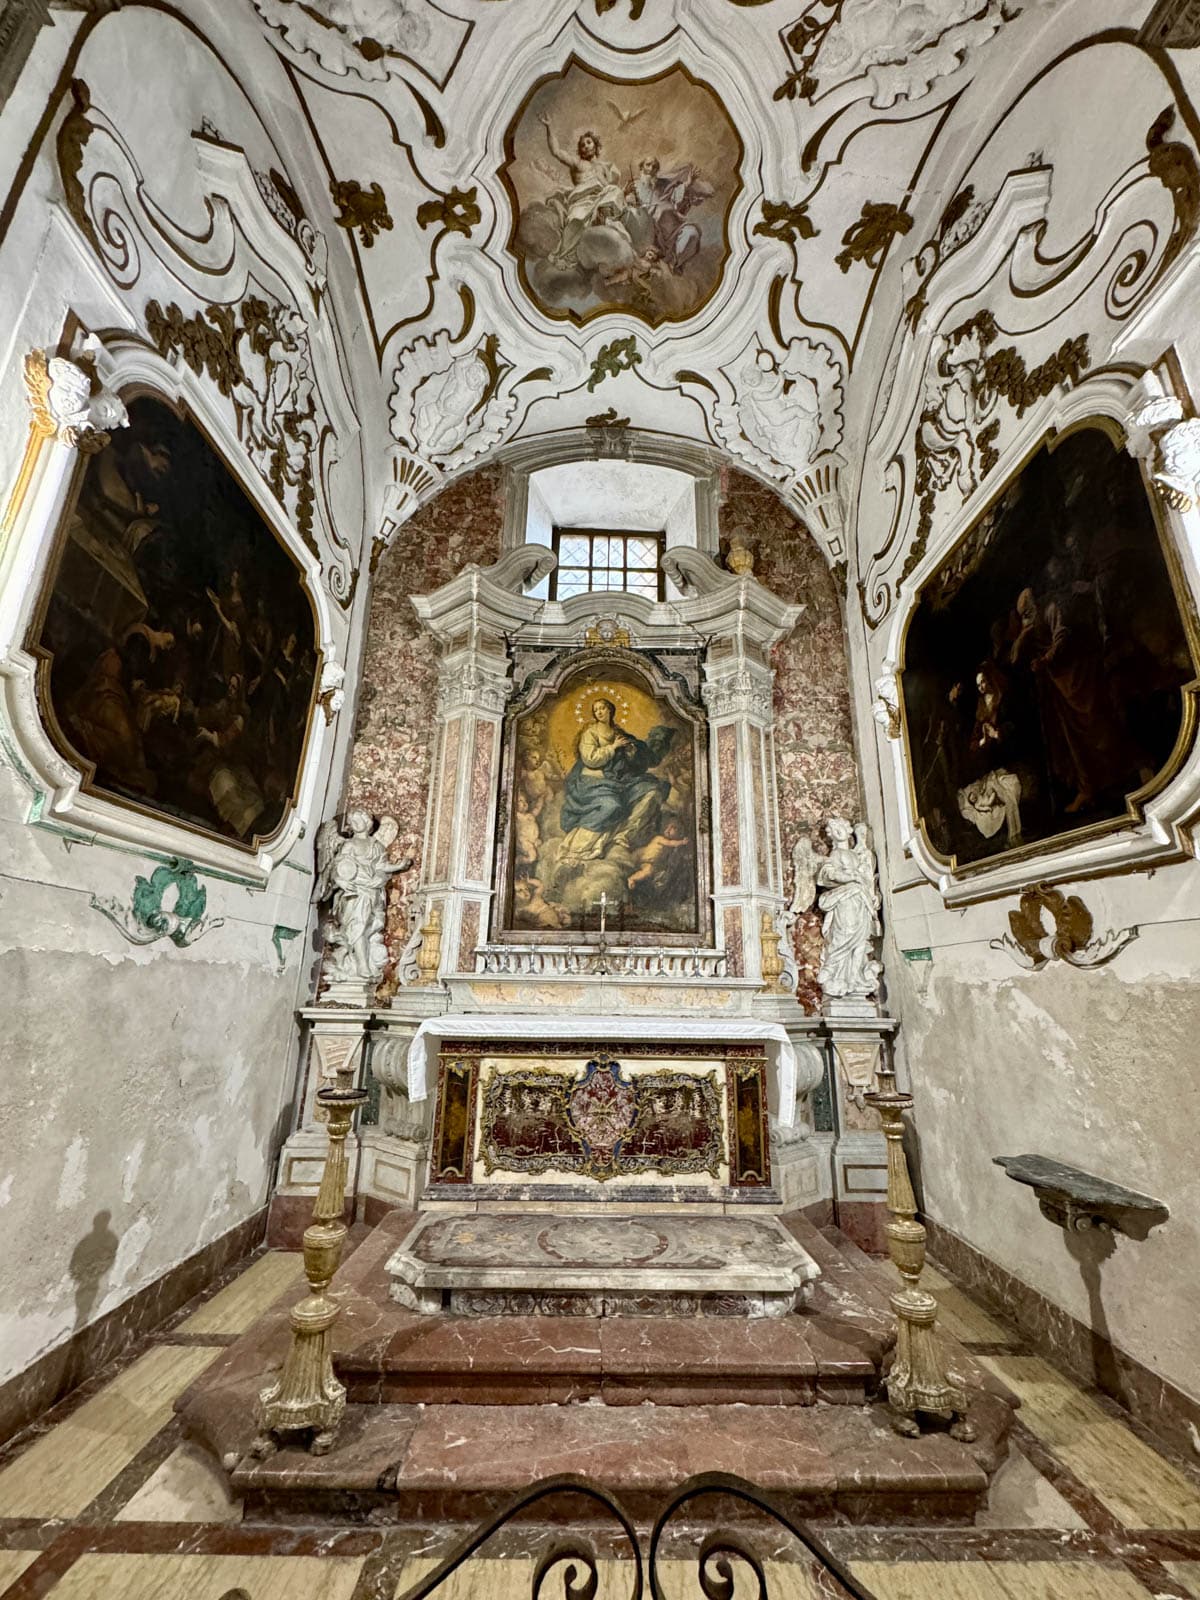 Inside of a church with marble alters and paintings.